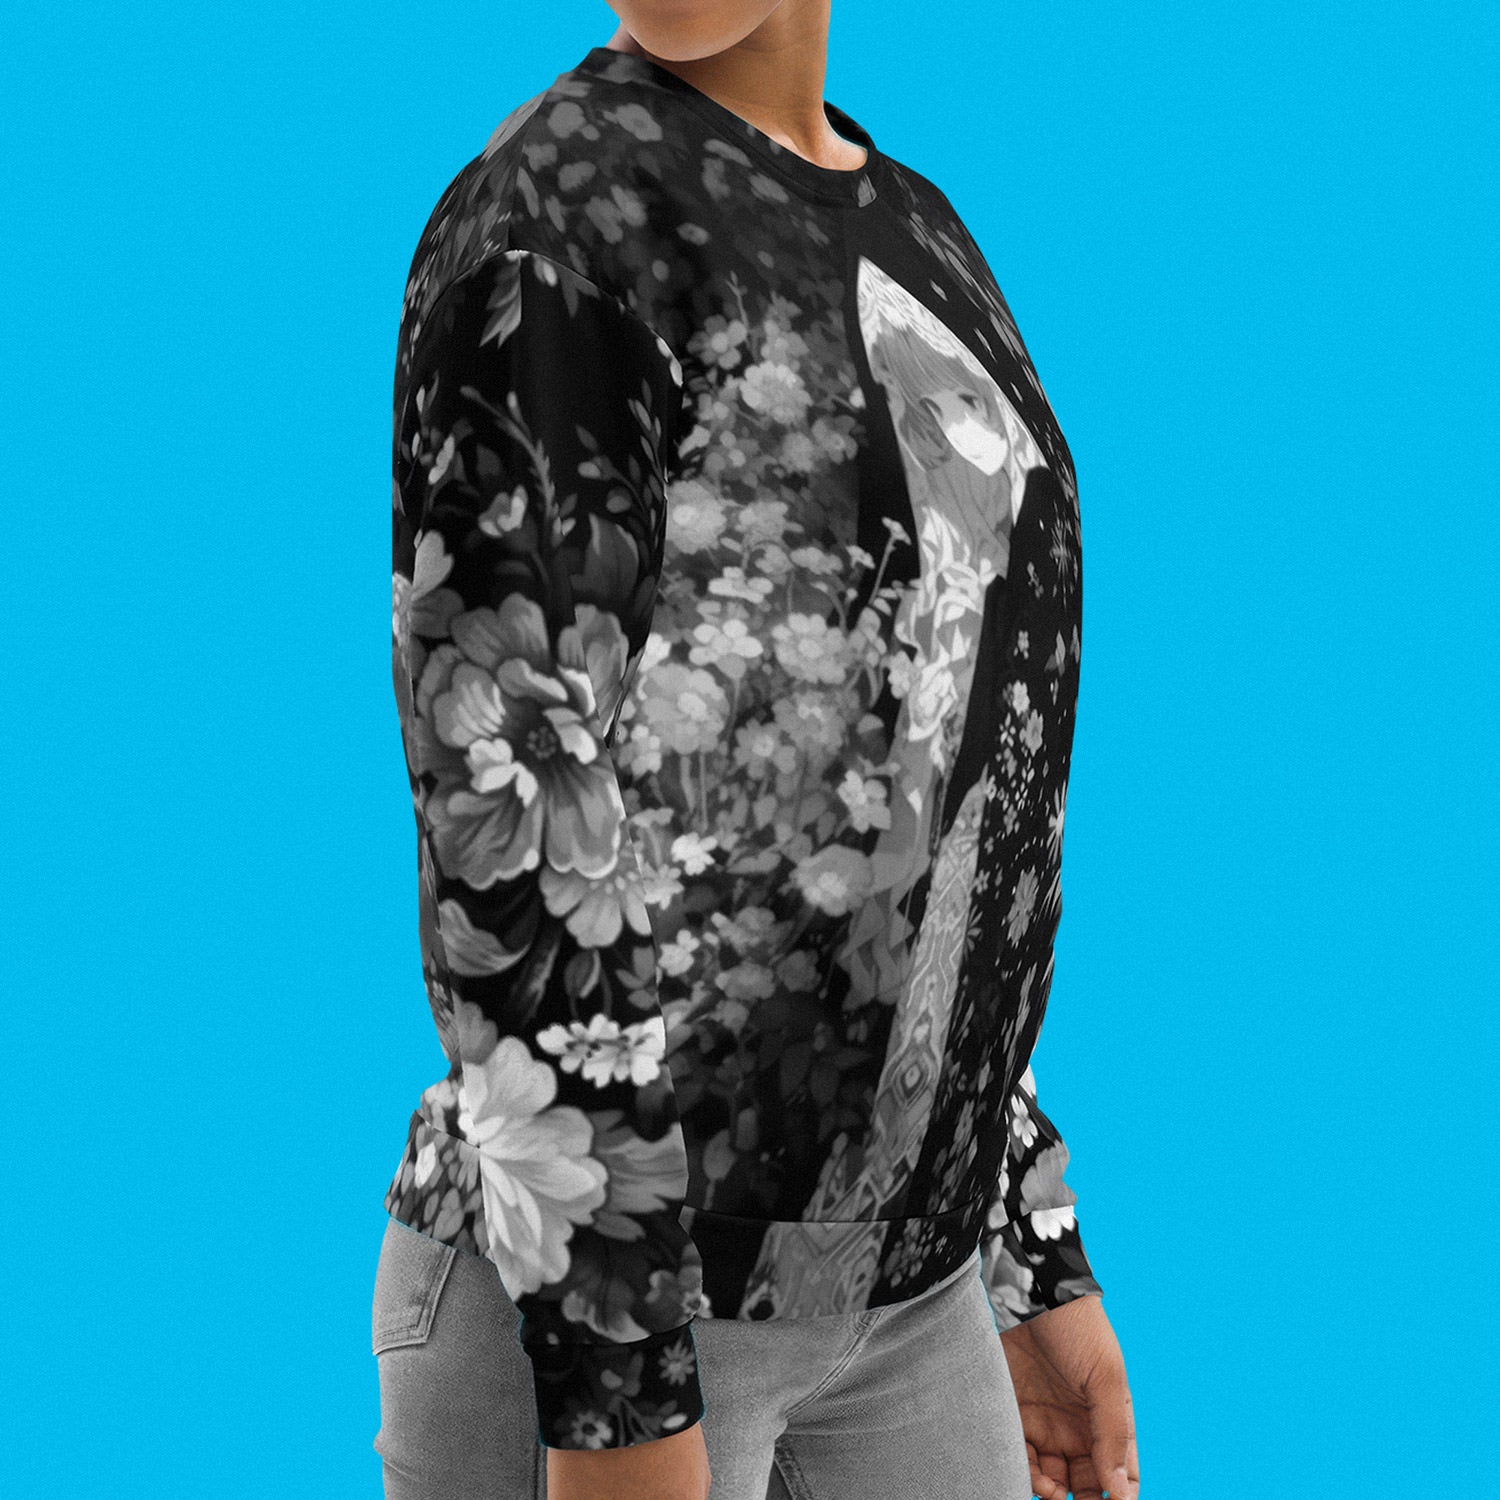 Unisex, each unique, all-over printed sweatshirt is precision-cut and hand-sewn to achieve the best possible look and bring out the intricate design. What's more, the durable fabric with a cotton-feel face and soft brushed fleece inside.